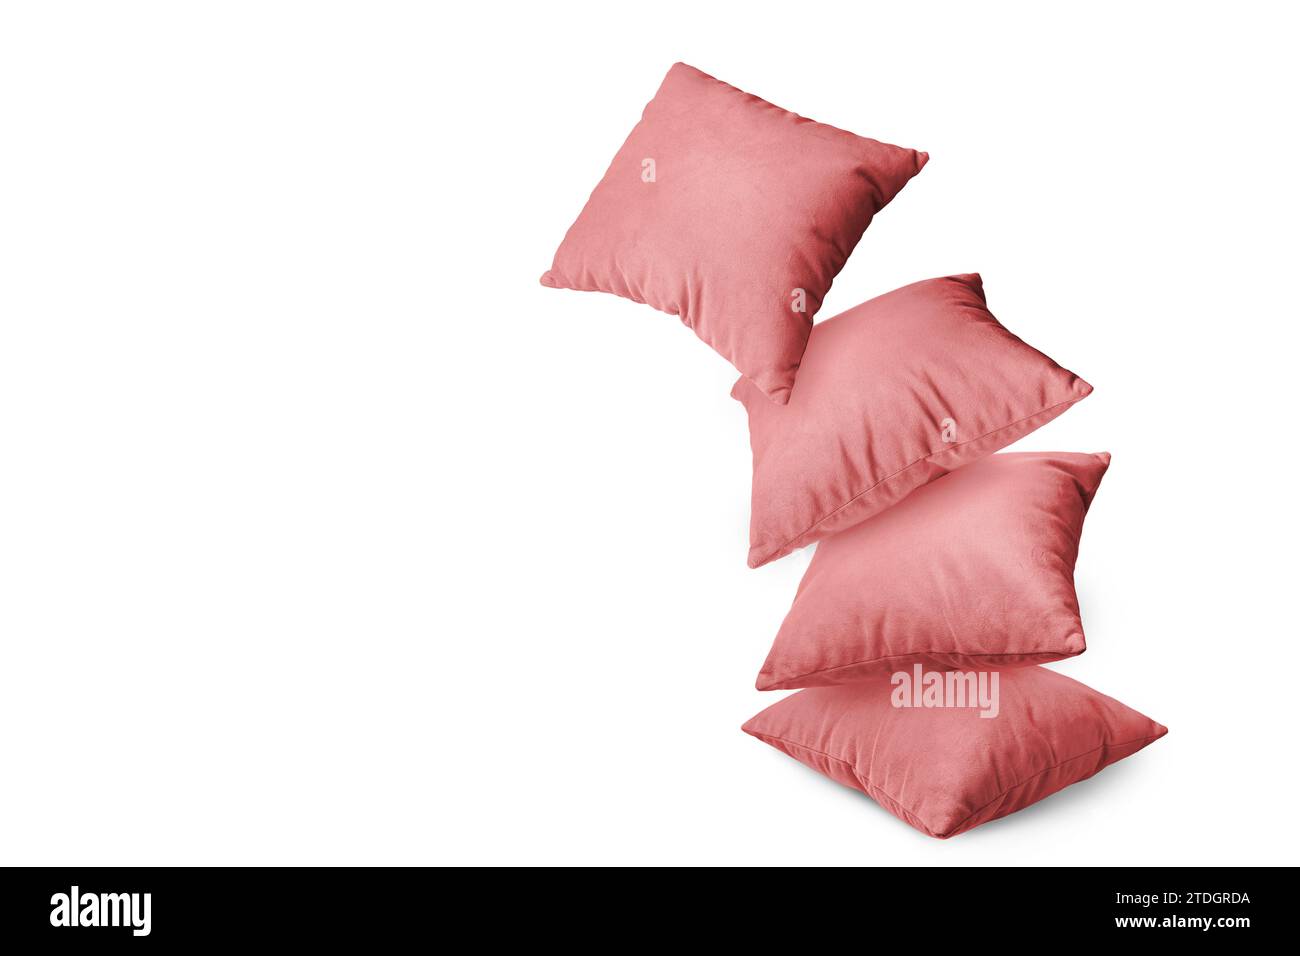 Stack of red pillows isolated on white background. Pile of  decorative cushions for sleeping and resting, home interior, house decor. Stock Photo